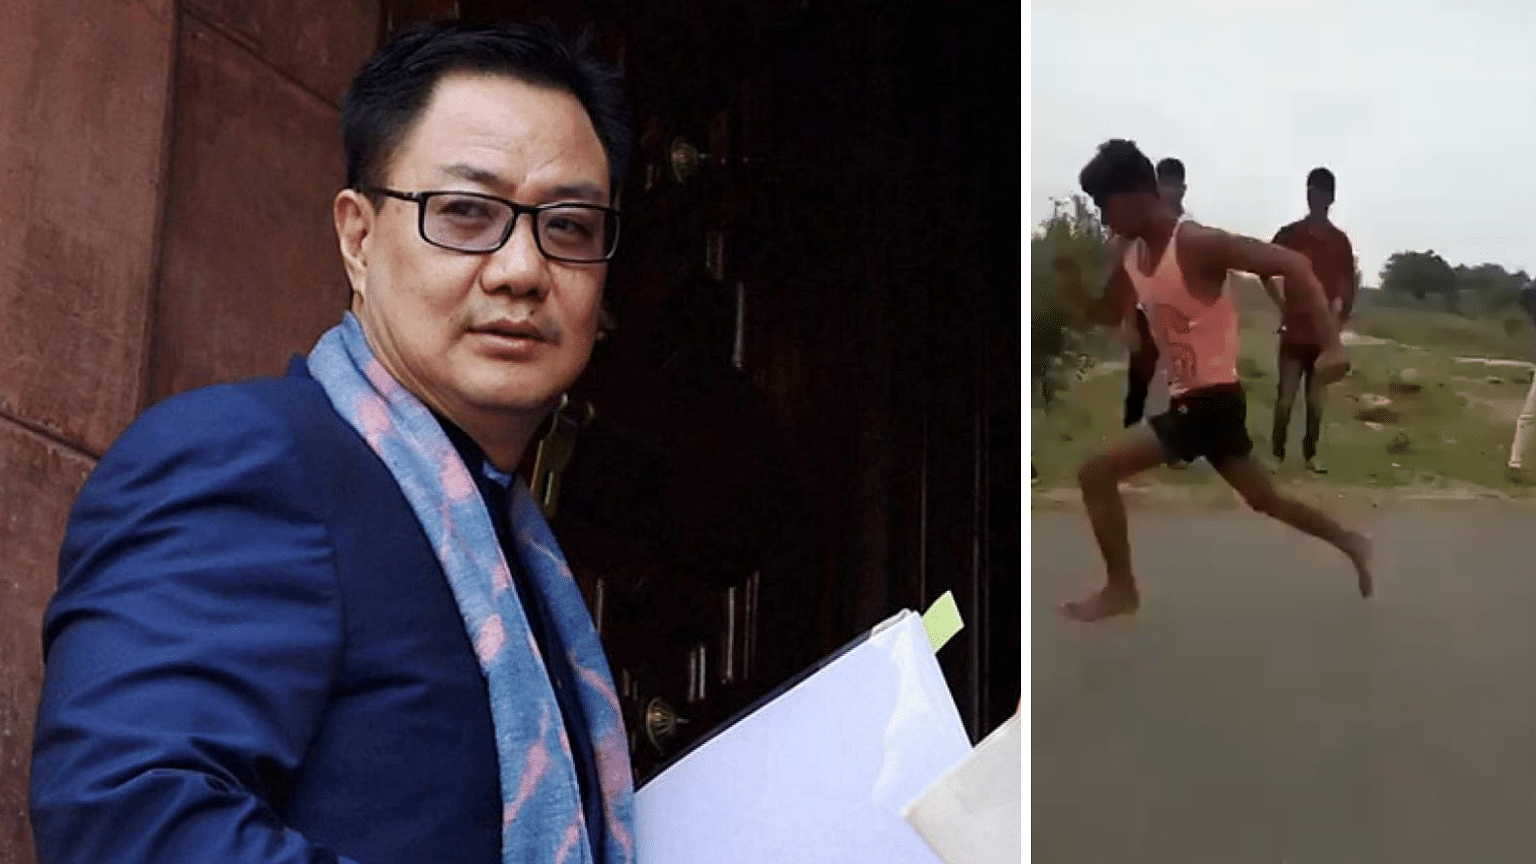 After seeing the video, Sports Minister Kiren Rijiju asked the man to be brought to him so that he could get him enrolled in a coaching institute.